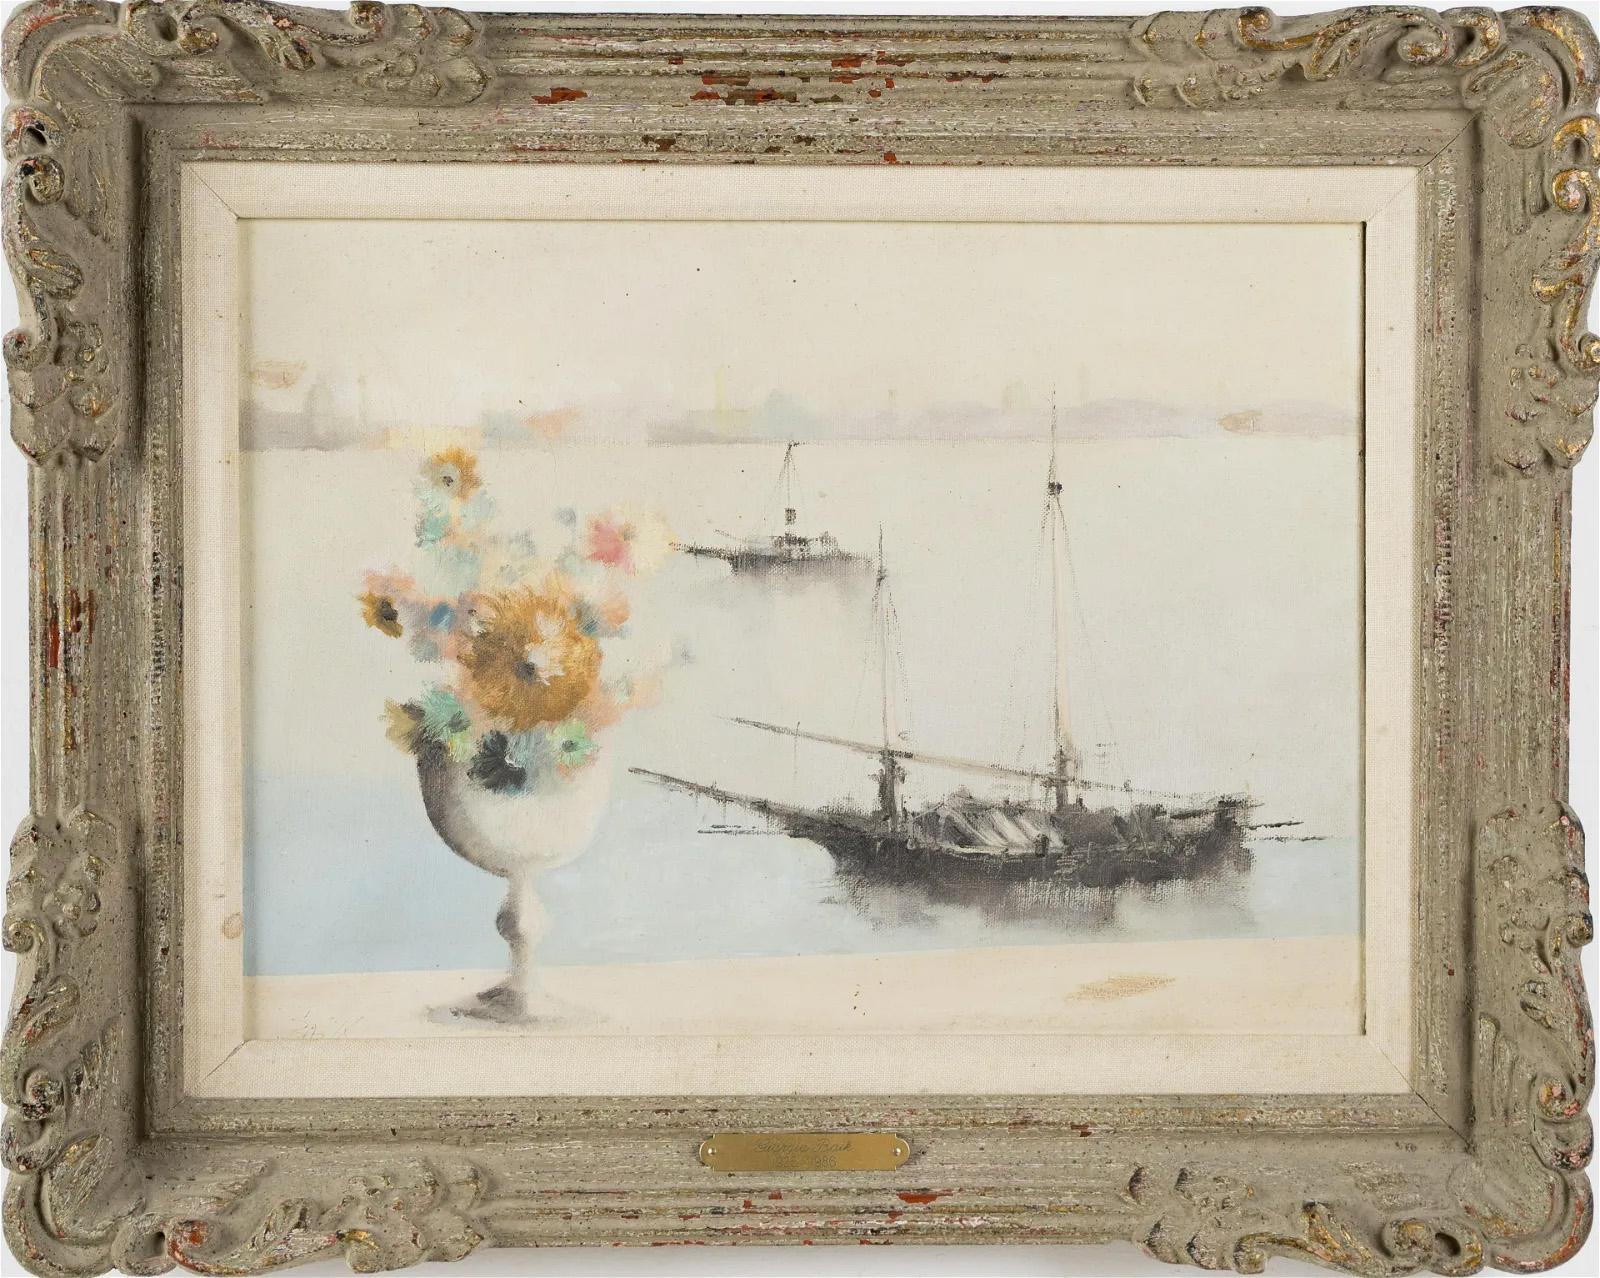 Unknown Abstract Painting - Antique Italian Impressionist Venice Trompe L'Oeil Flower Cityscape Oil Painting